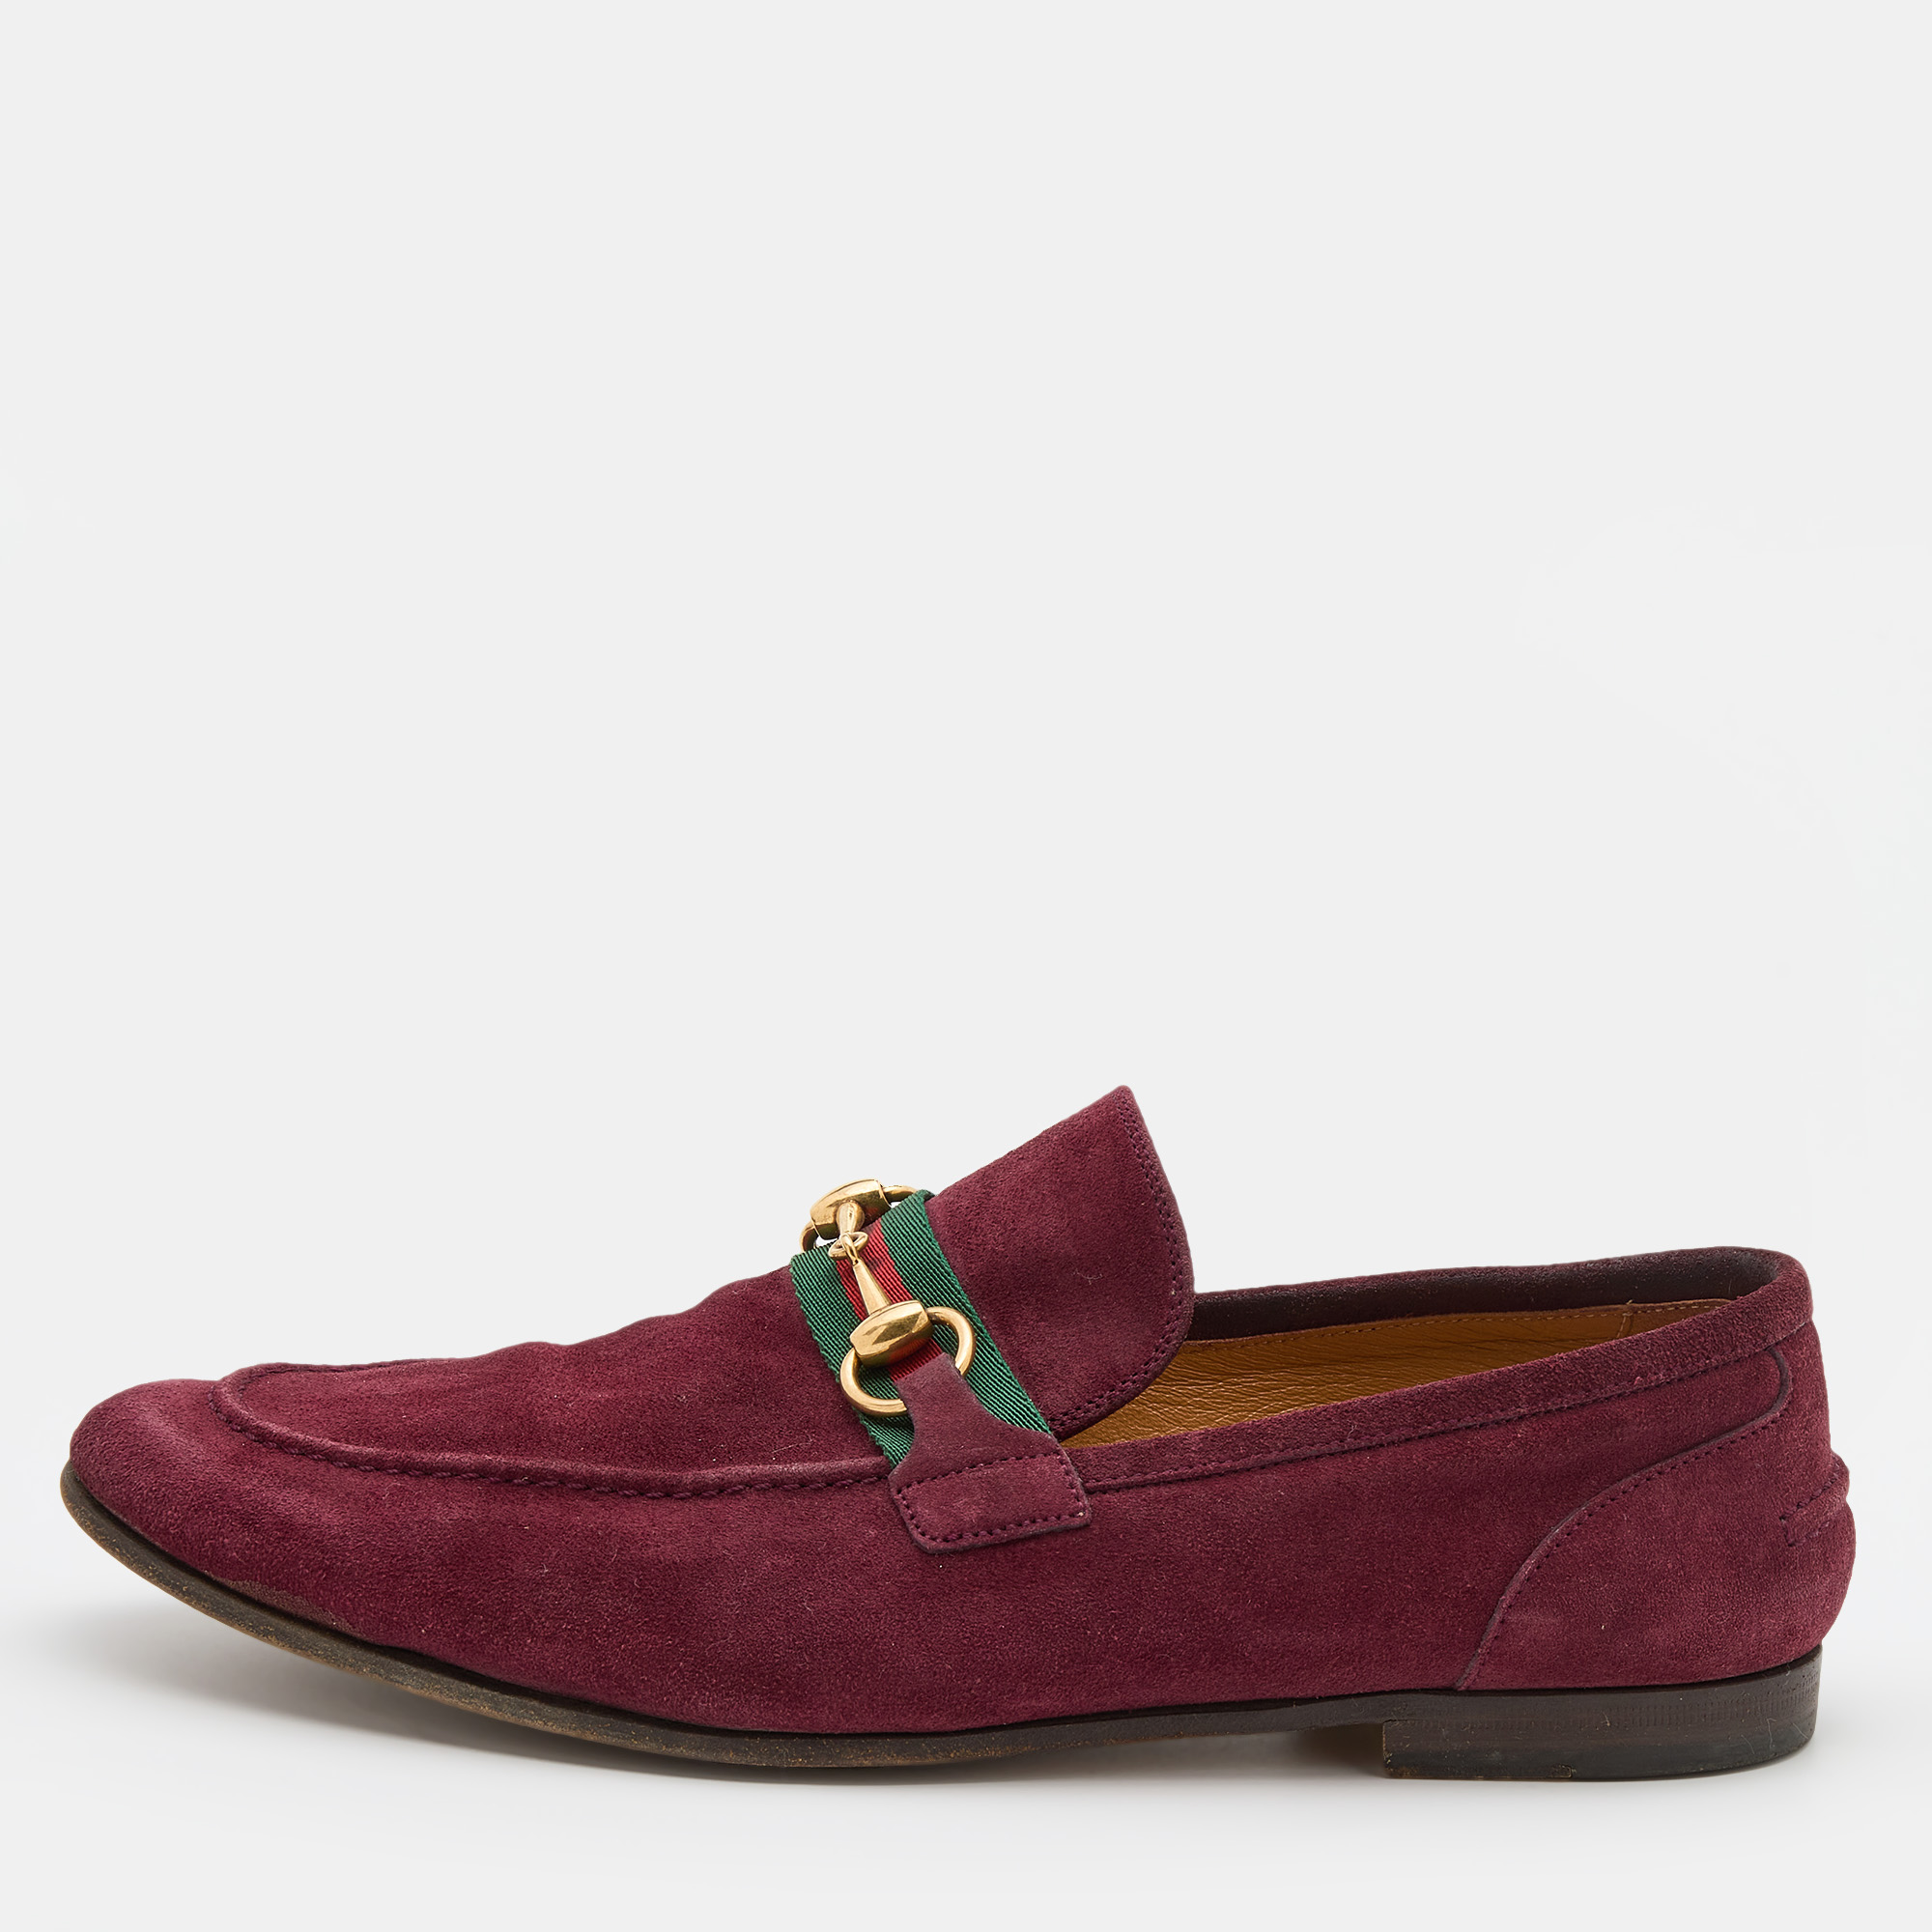 Pre-owned Gucci Burgundy Suede Web Horsebit Slip On Loafers Size 42